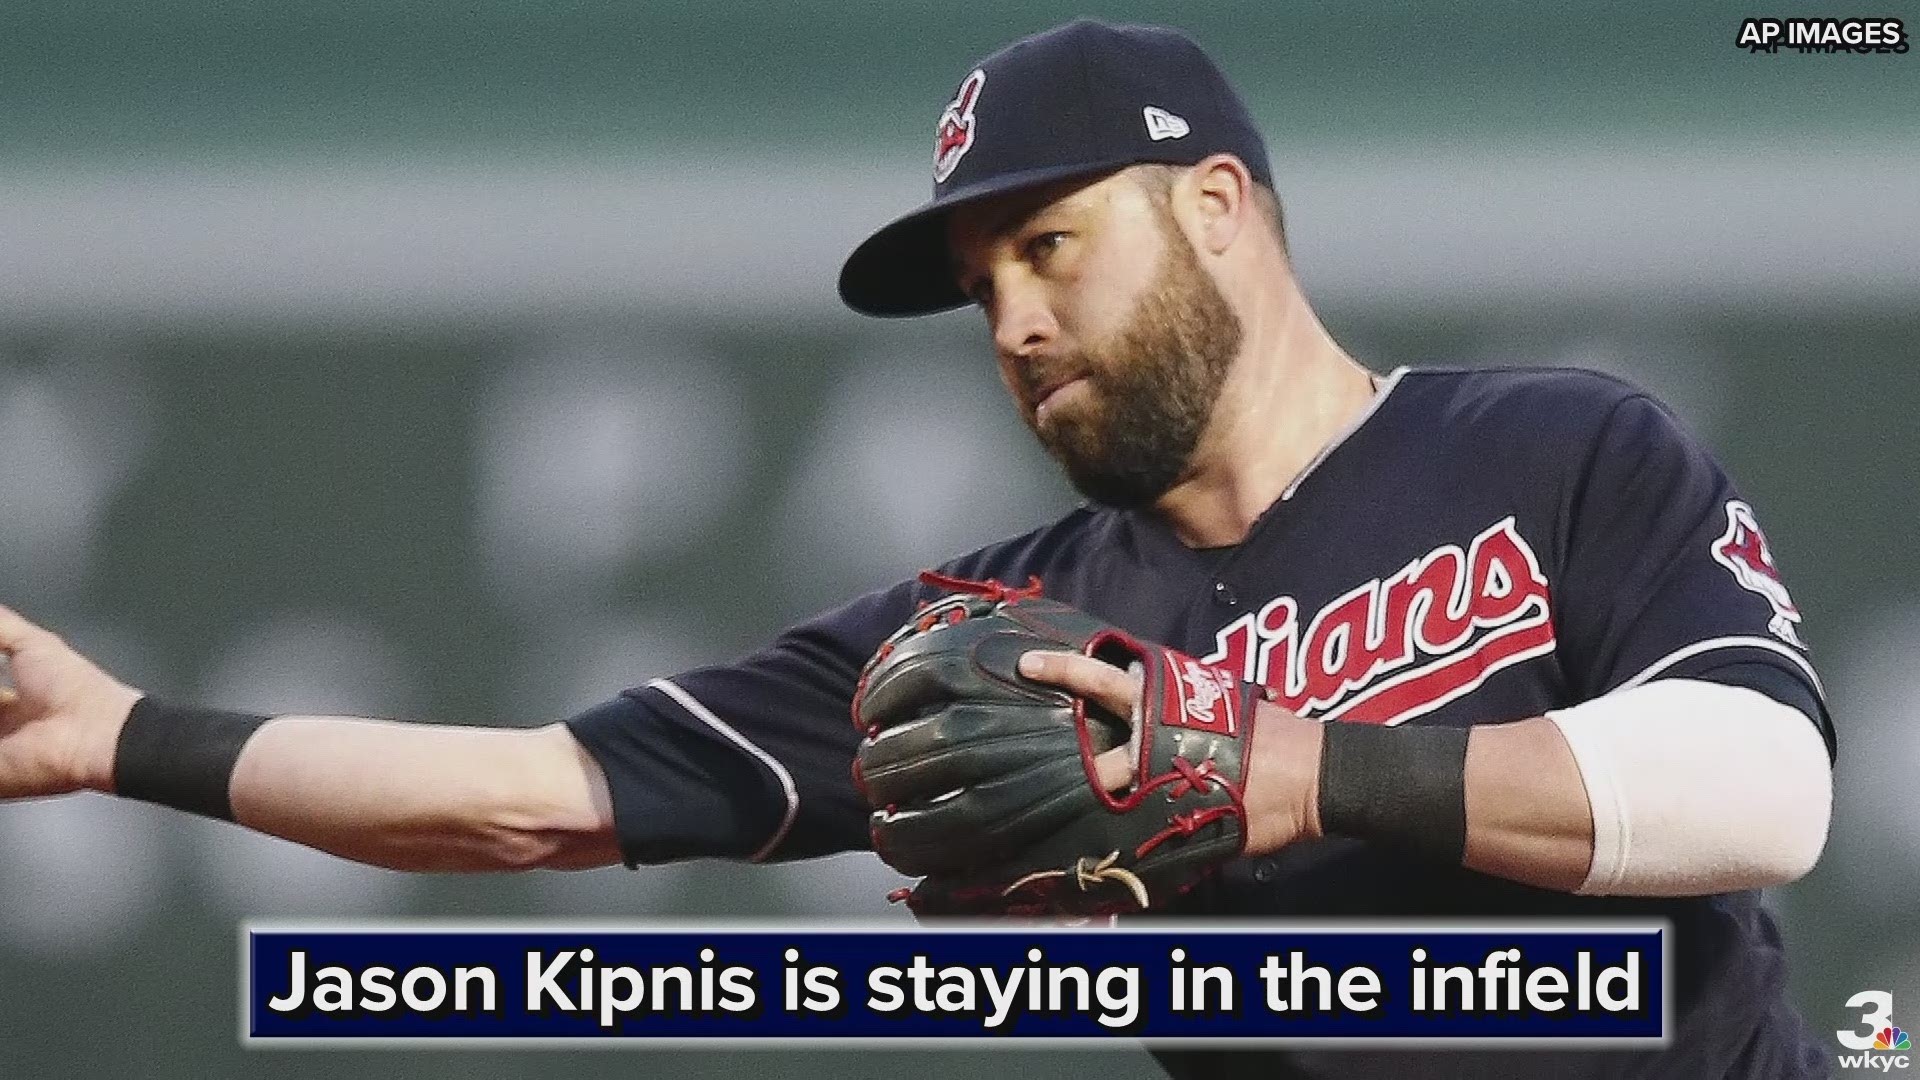 Cleveland Indians manager Terry Francona told reporters on Monday that Jason Kipnis will be the team's starting second baseman this season.